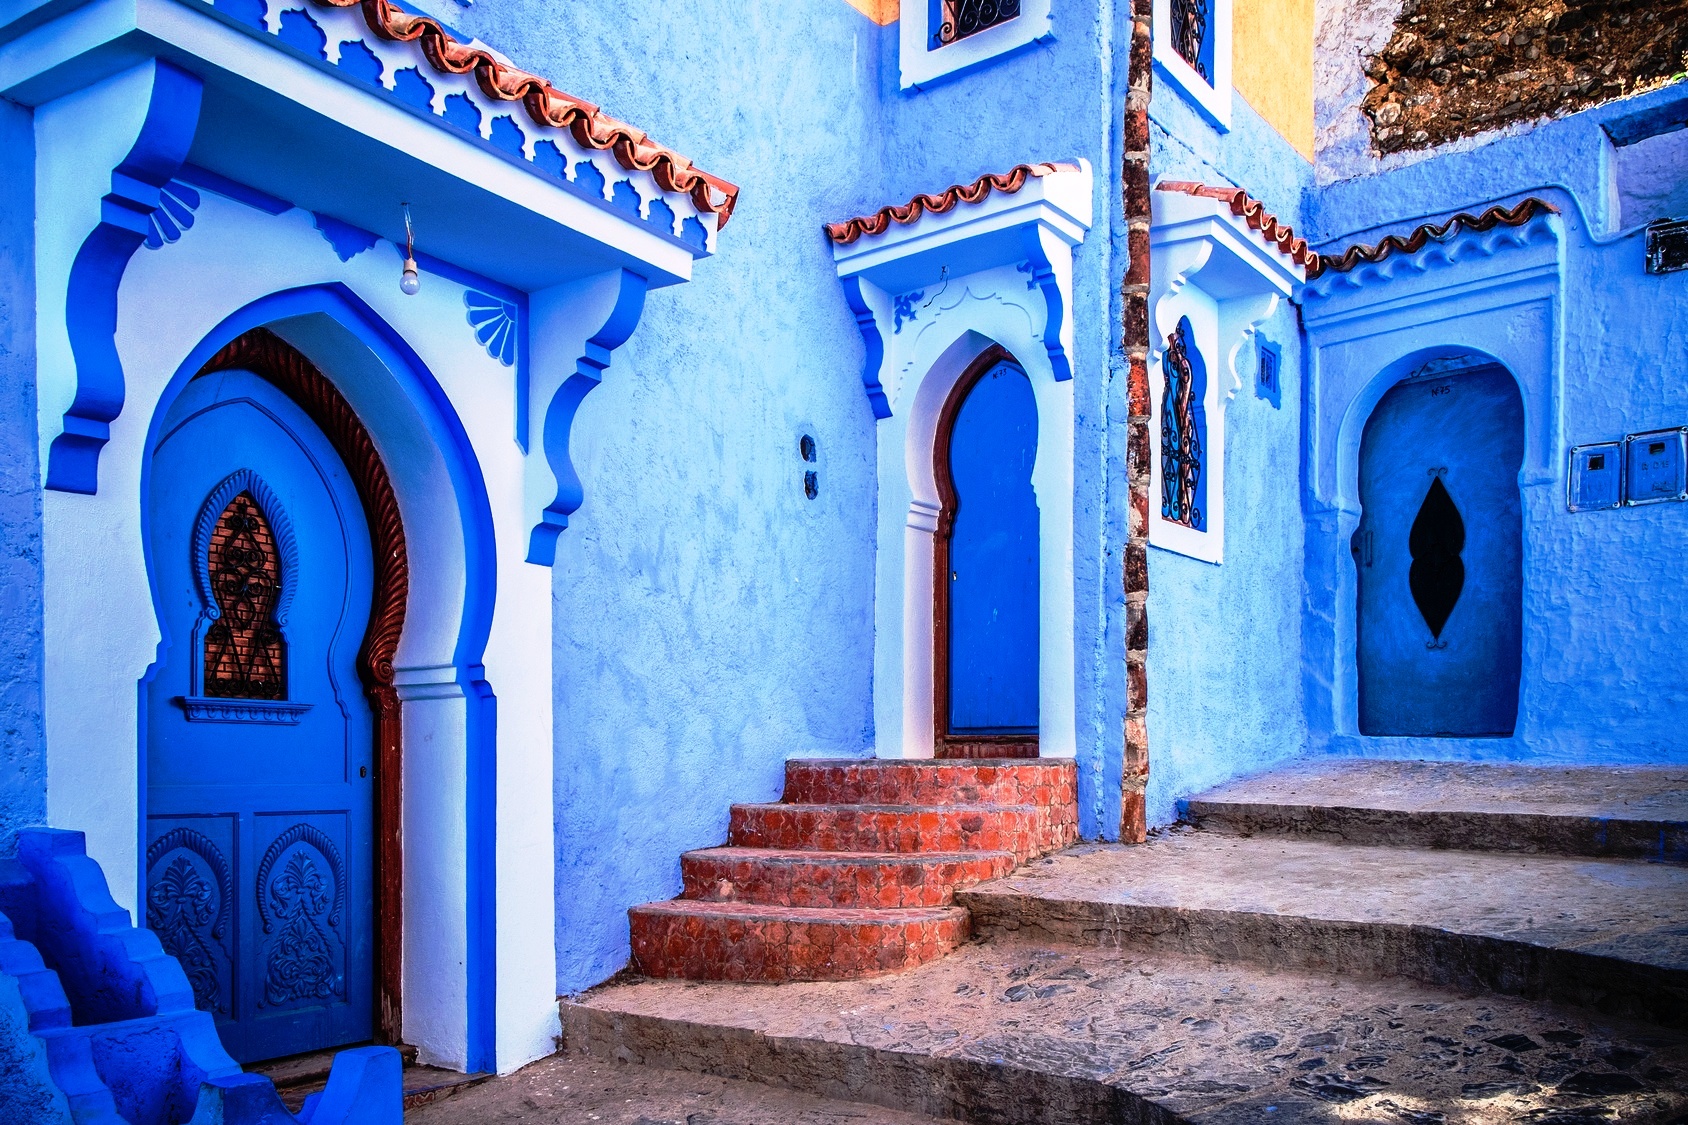 15 days majestic Morocco tour from Casablanca to explore the highlights of Morocco